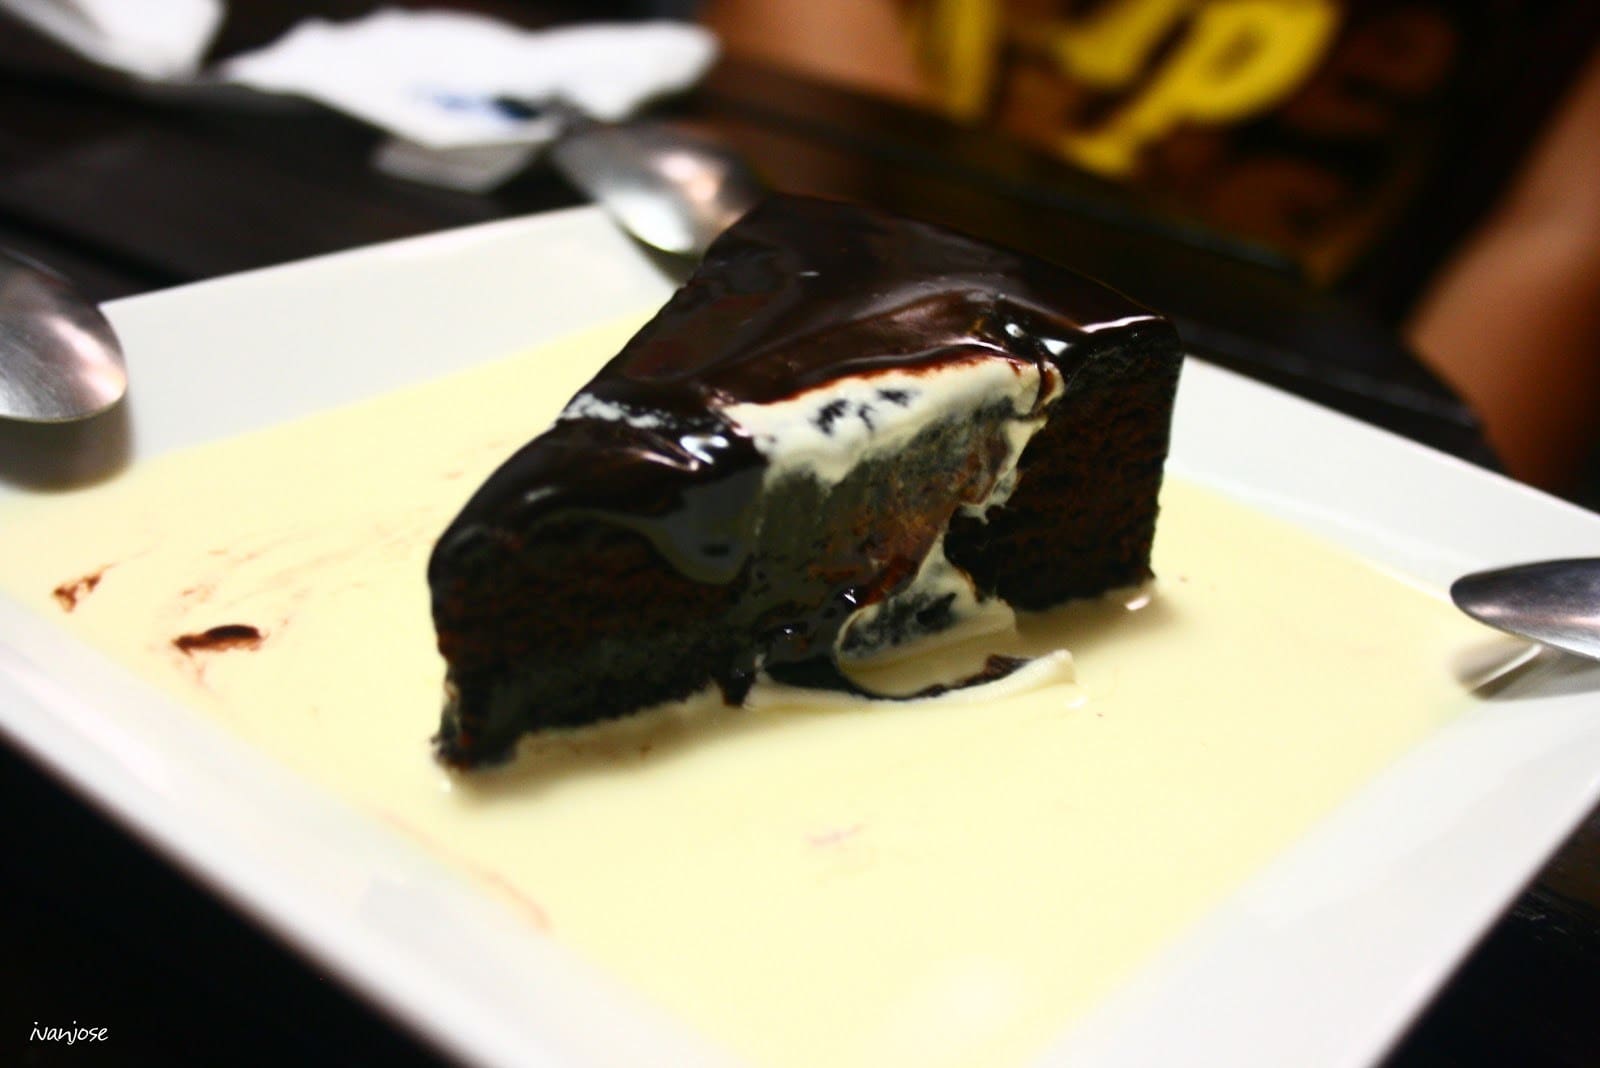 Chocolate cake at Blugre Coffee in General Santos City, Mindanao